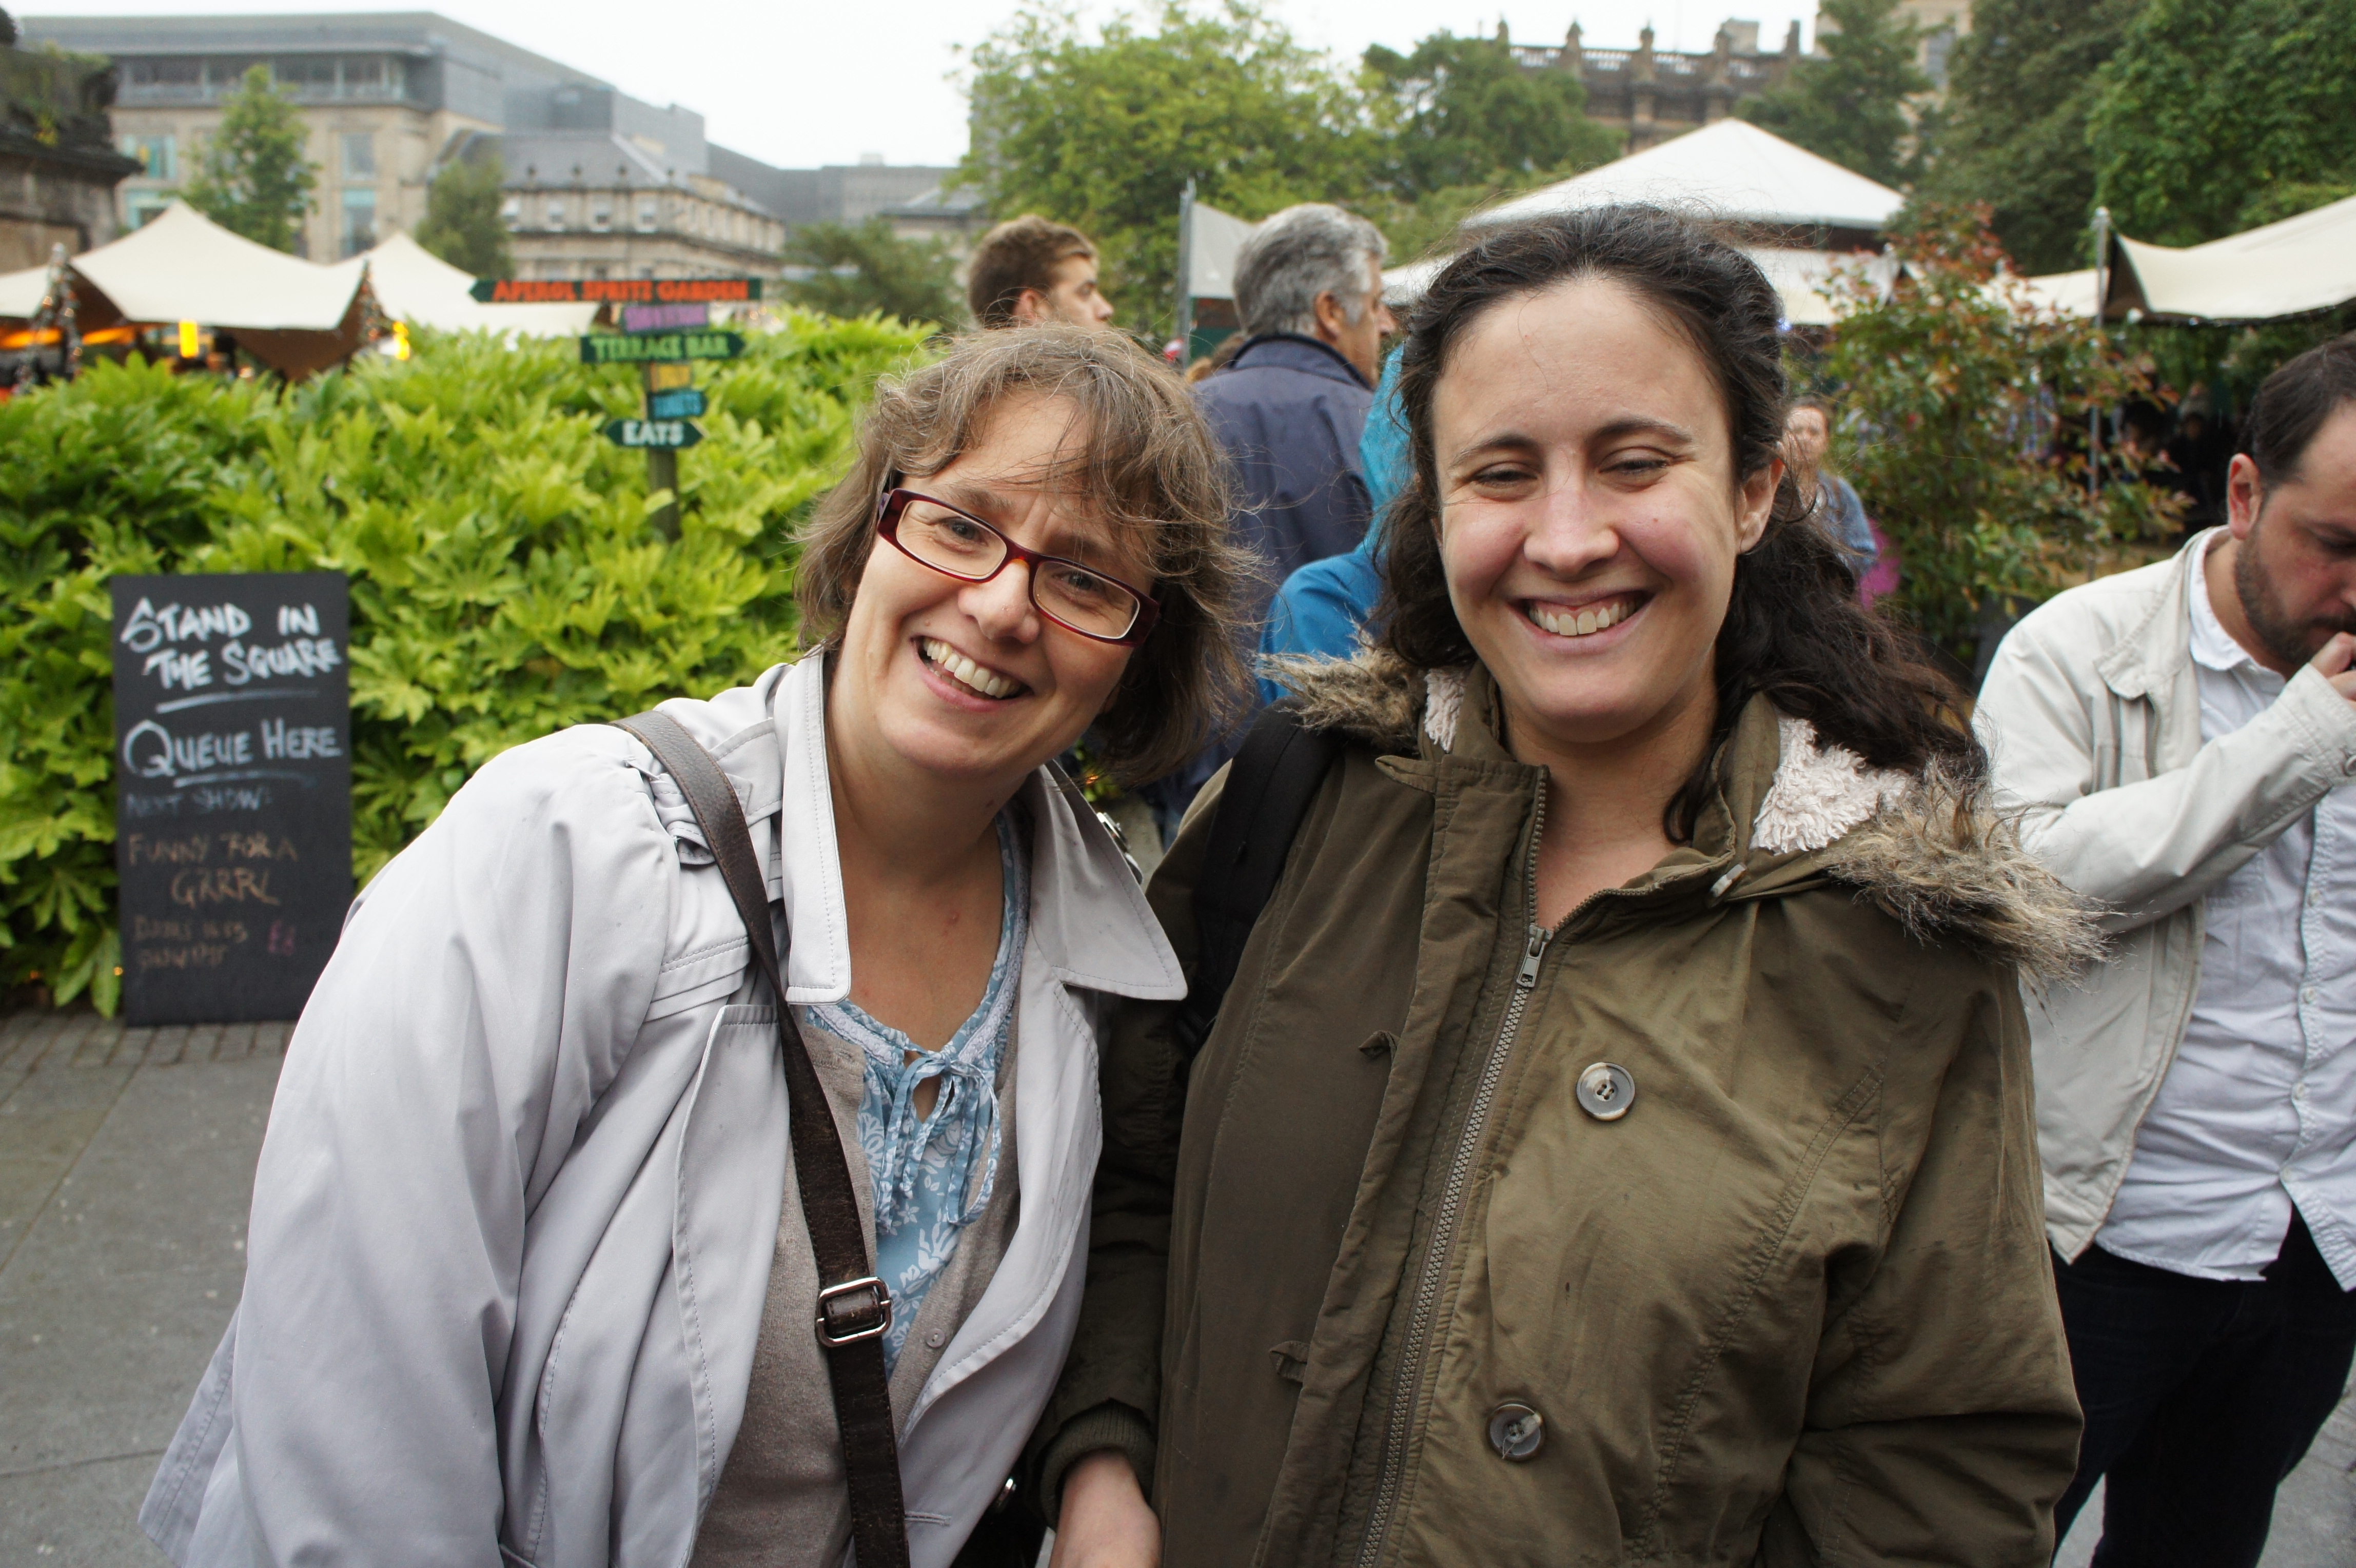 The Beltane Team takes a pause at the busy Edinburgh Fringe Fest. Heather Rea, left, and Sarah Anderson, right.